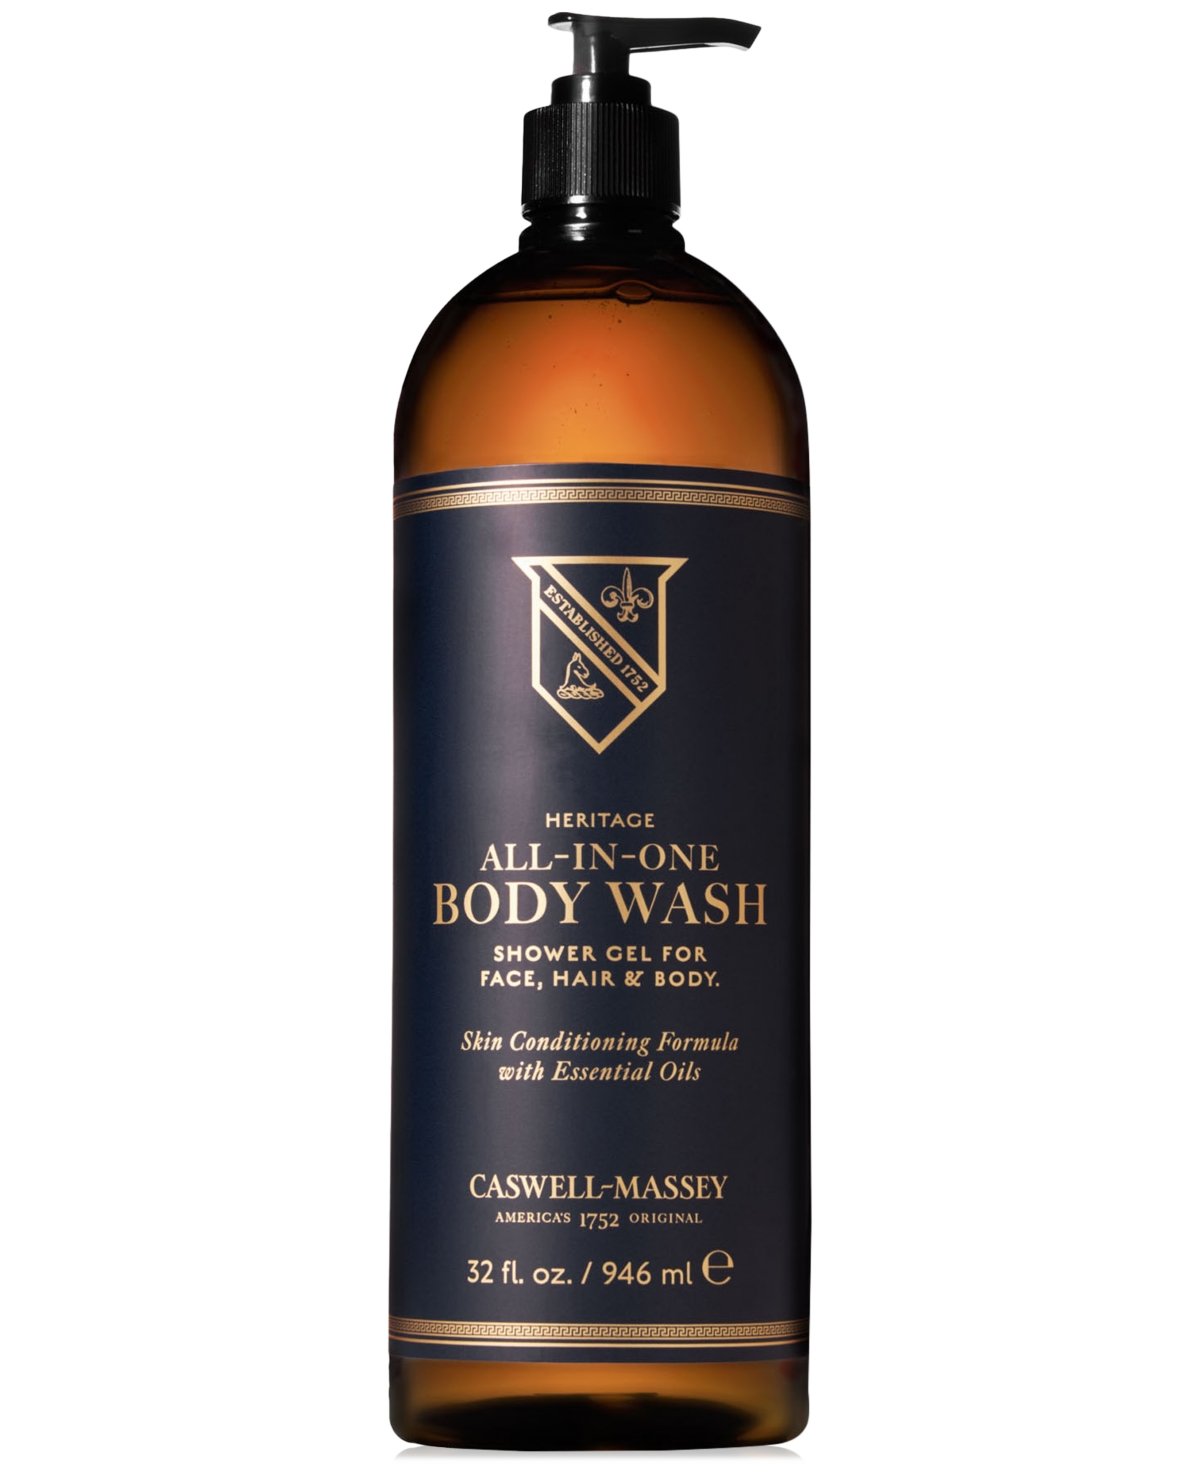 Heritage All-In-One Body Wash, 32 oz.